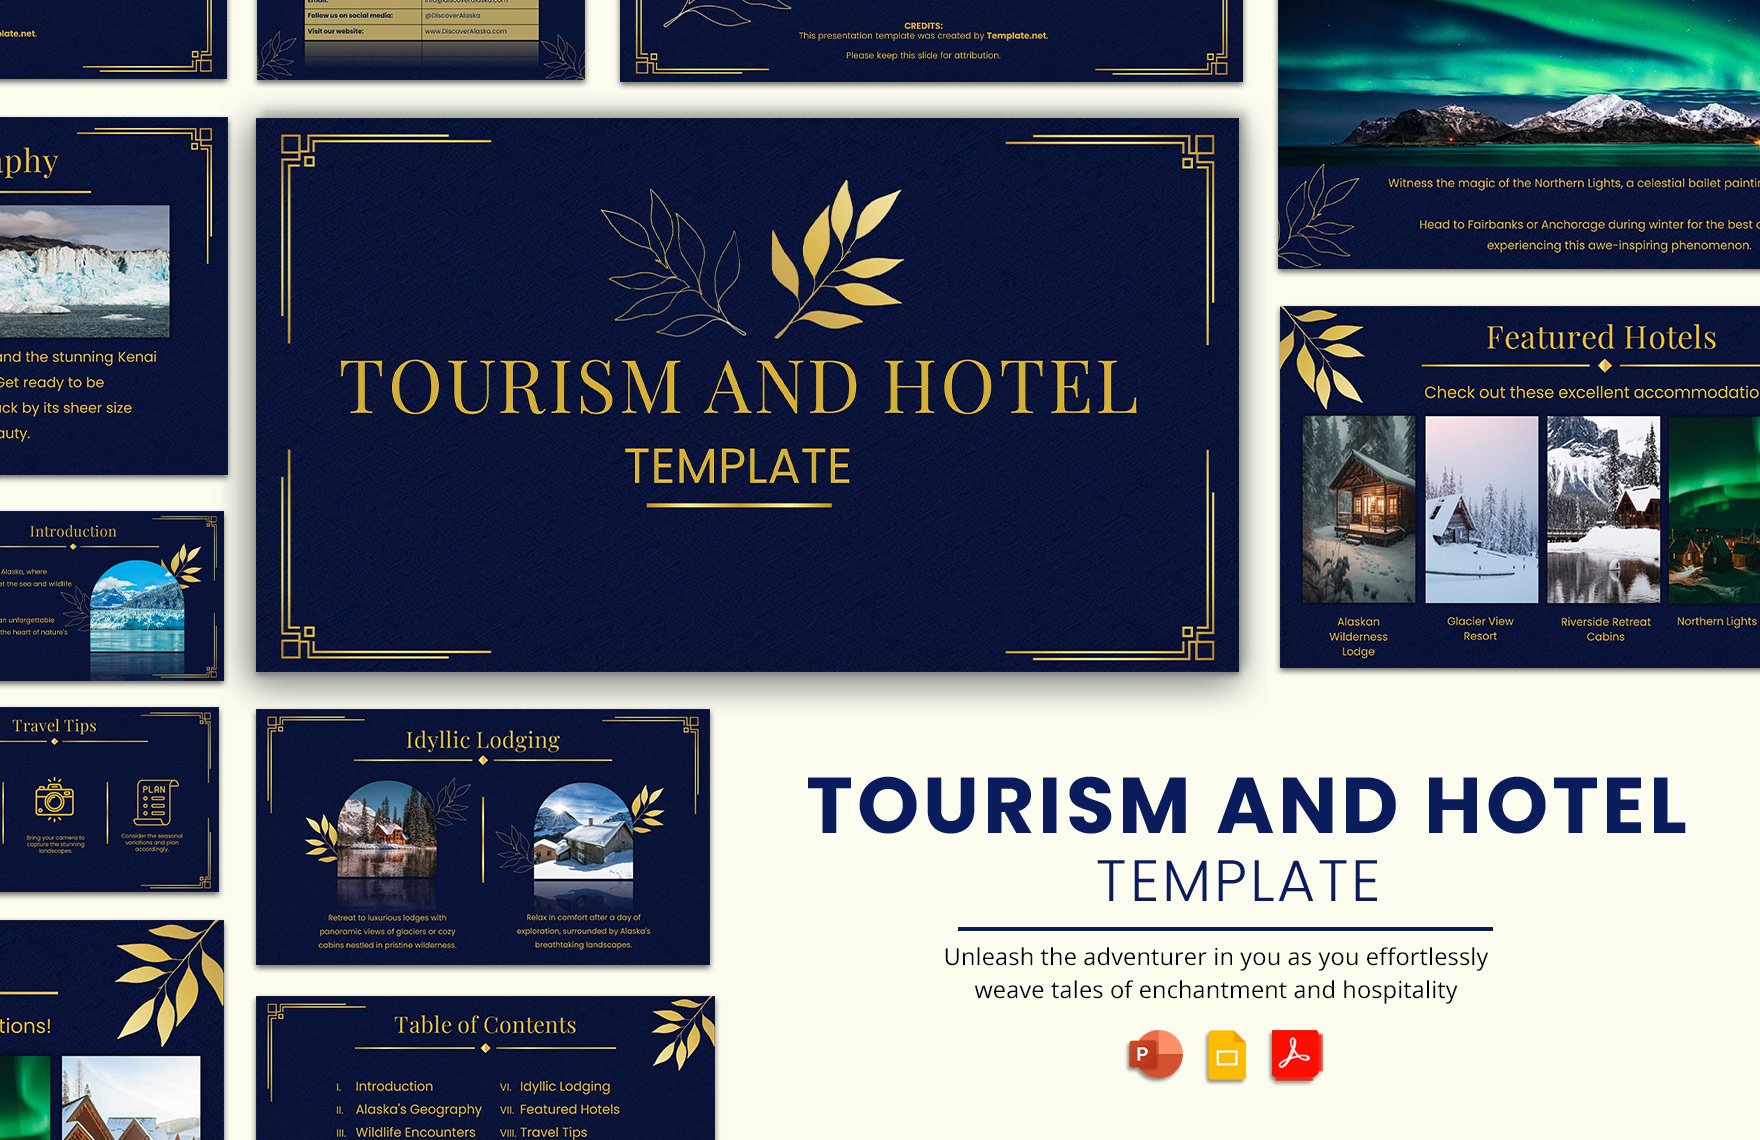 Free Tourism and Hotel Template